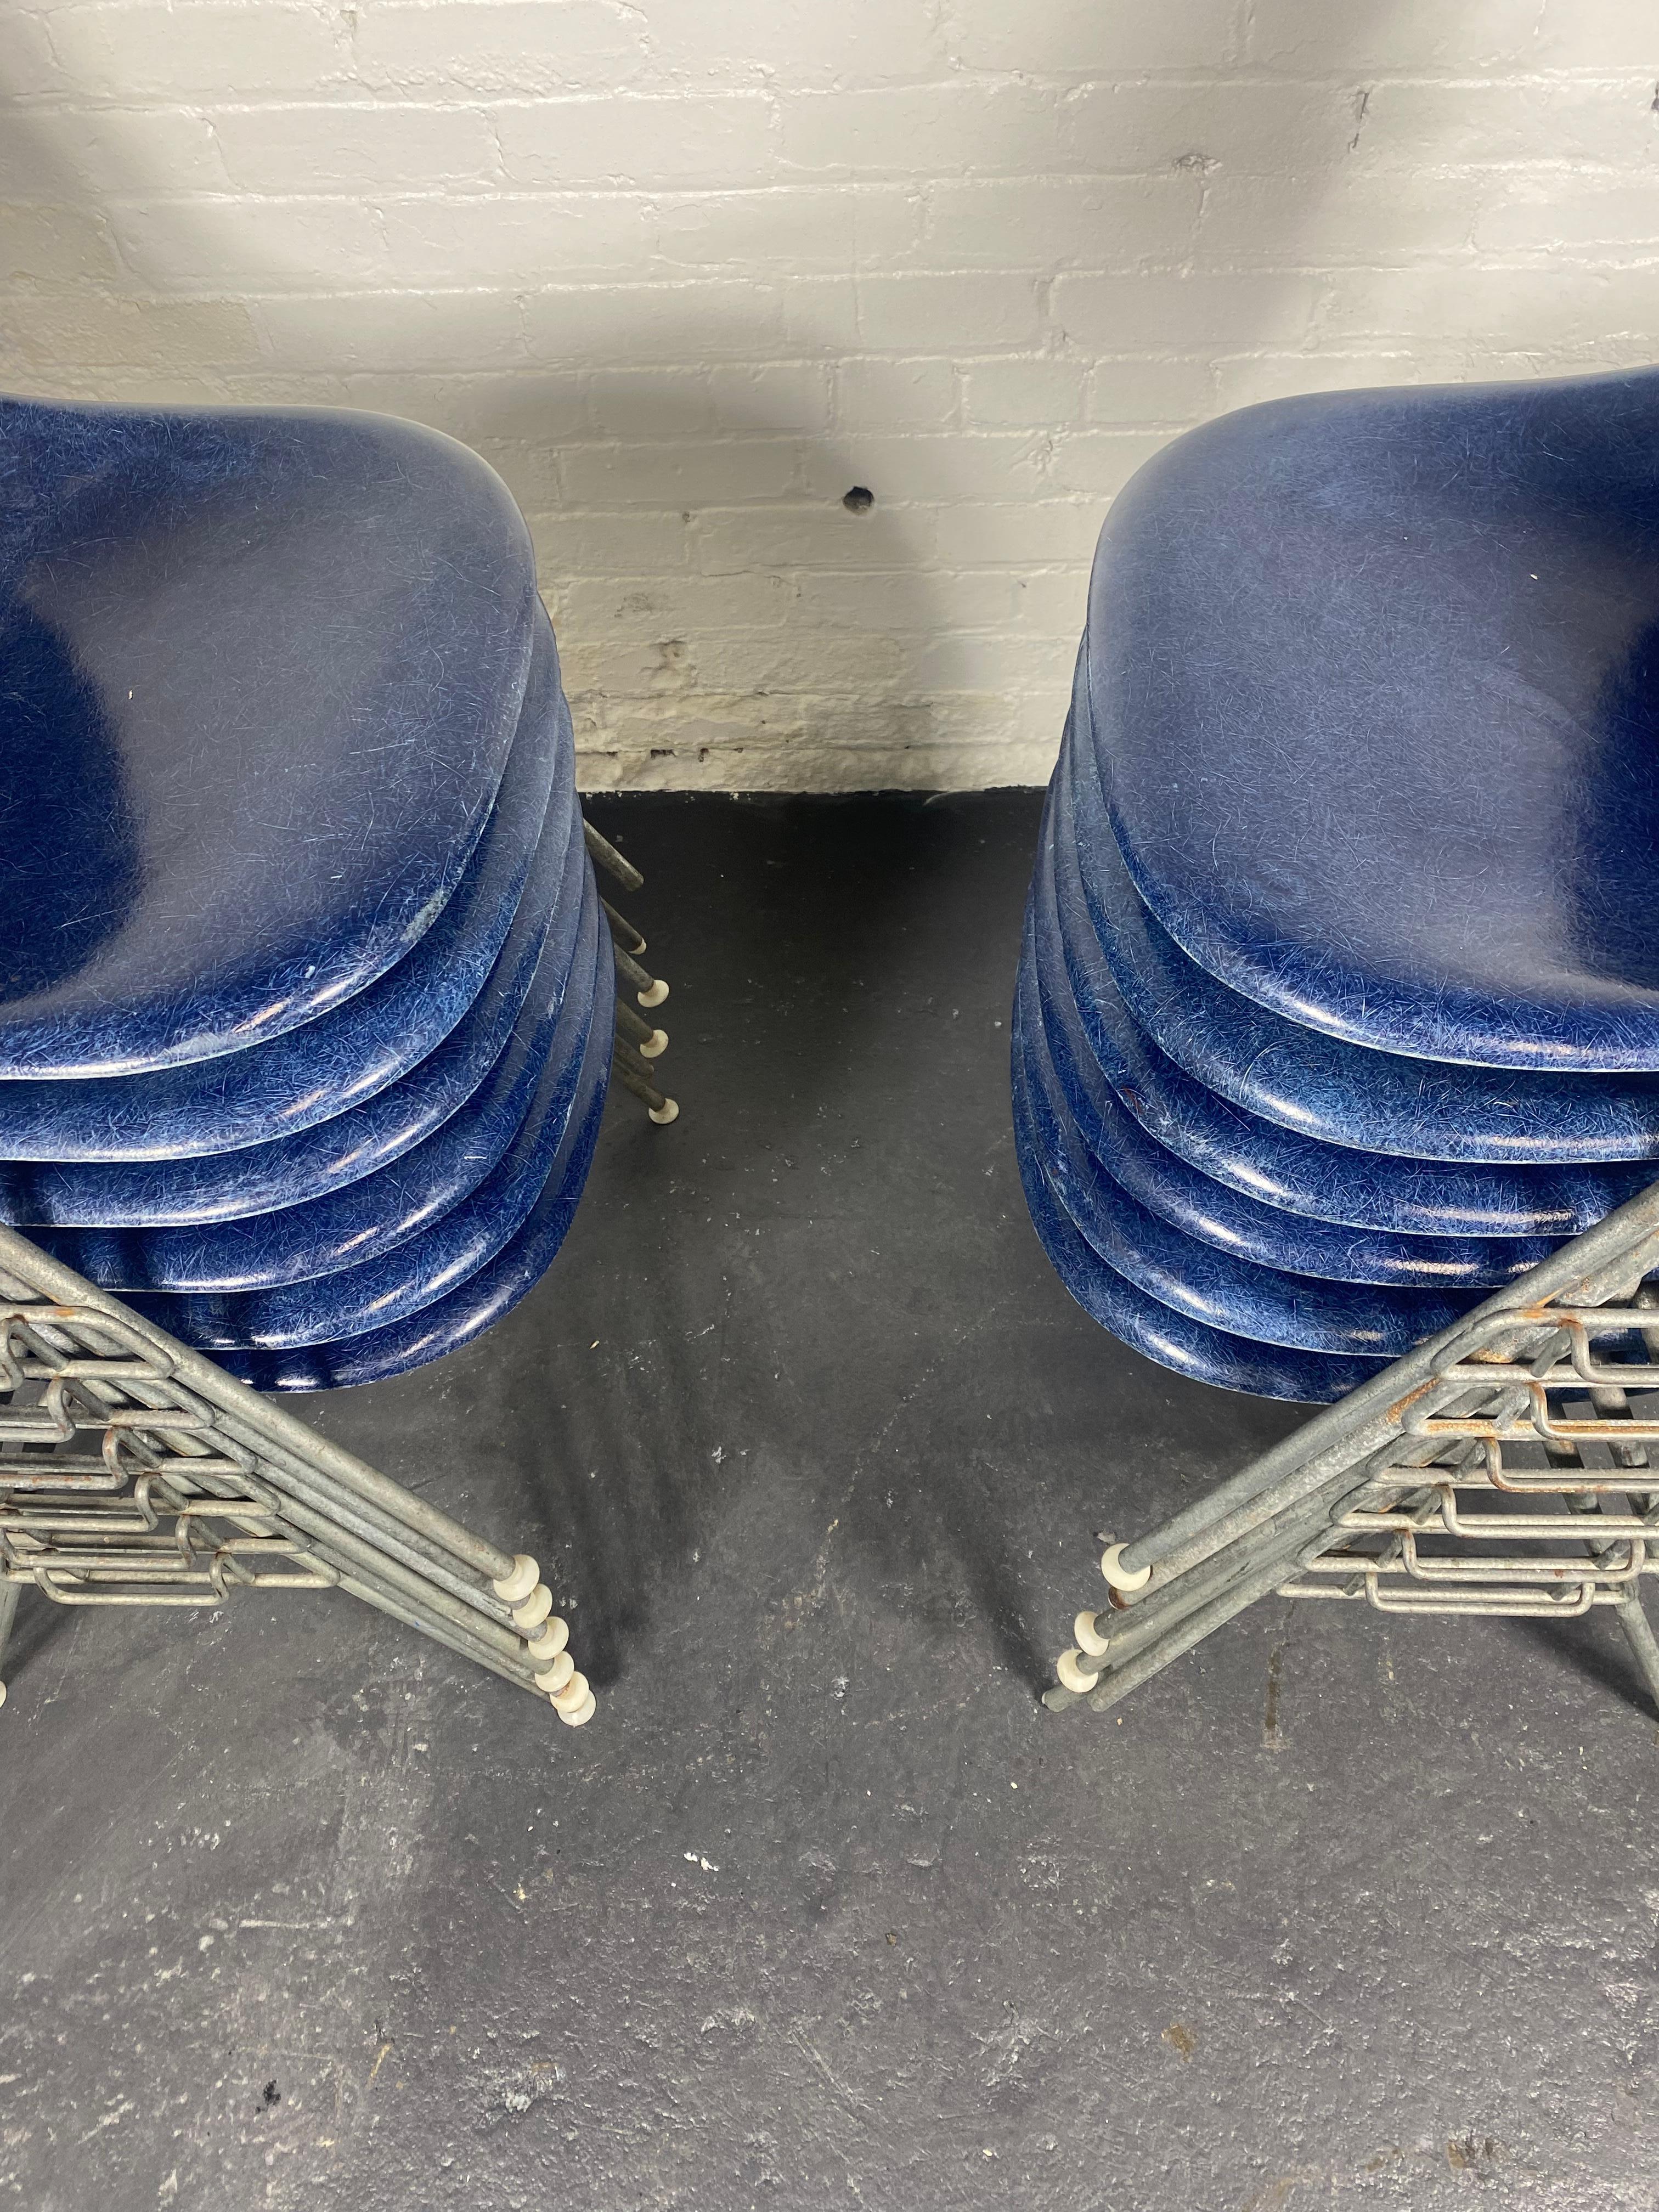 Mid-Century Modern 12 DSS Stacking Chairs Charles & Ray Eames Herman Miller, Blue Fiberglass, 1960s For Sale